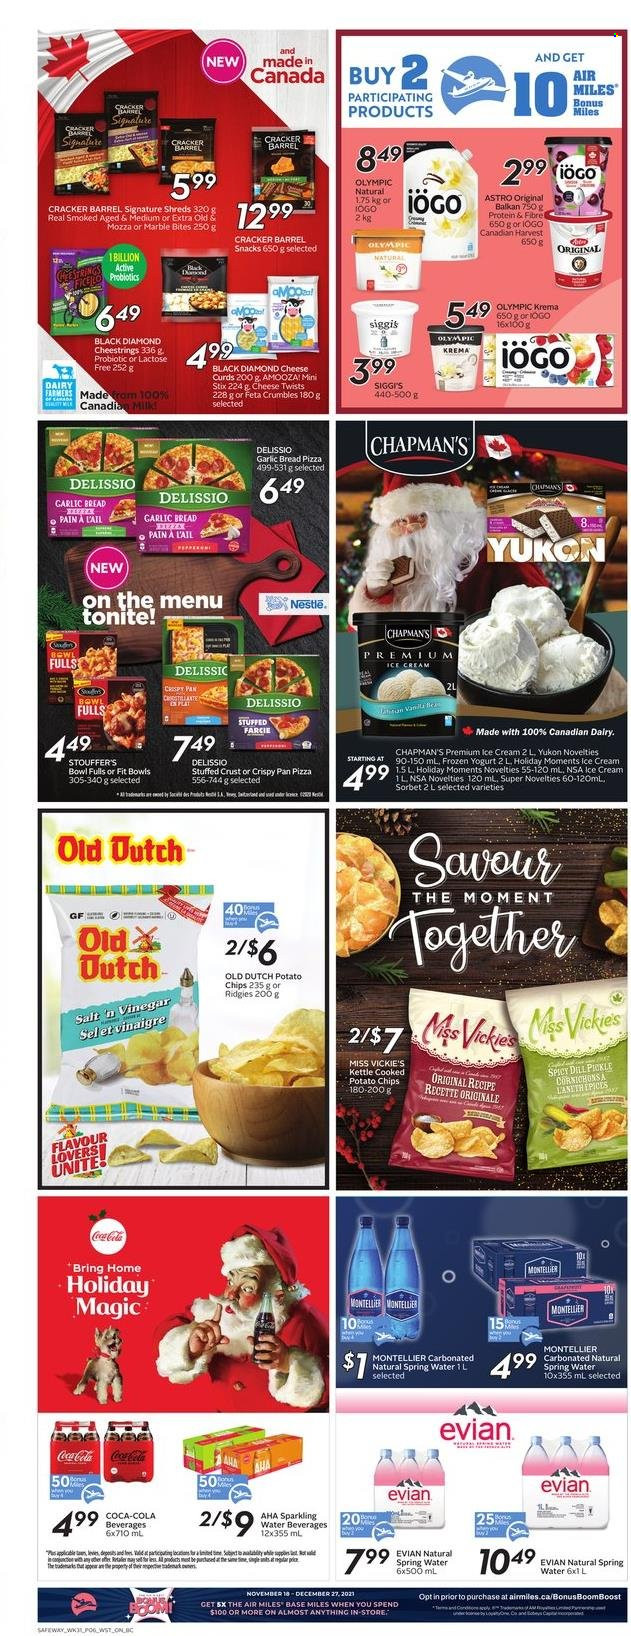 thumbnail - Safeway Flyer - November 25, 2021 - December 01, 2021 - Sales products - bread, pizza, string cheese, feta, cheese curd, yoghurt, milk, Stouffer's, snack, crackers, dill pickle, potato chips, salt, dill, Coca-Cola, spring water, sparkling water, Evian, L'Or, Moments, probiotics, Nestlé. Page 7.